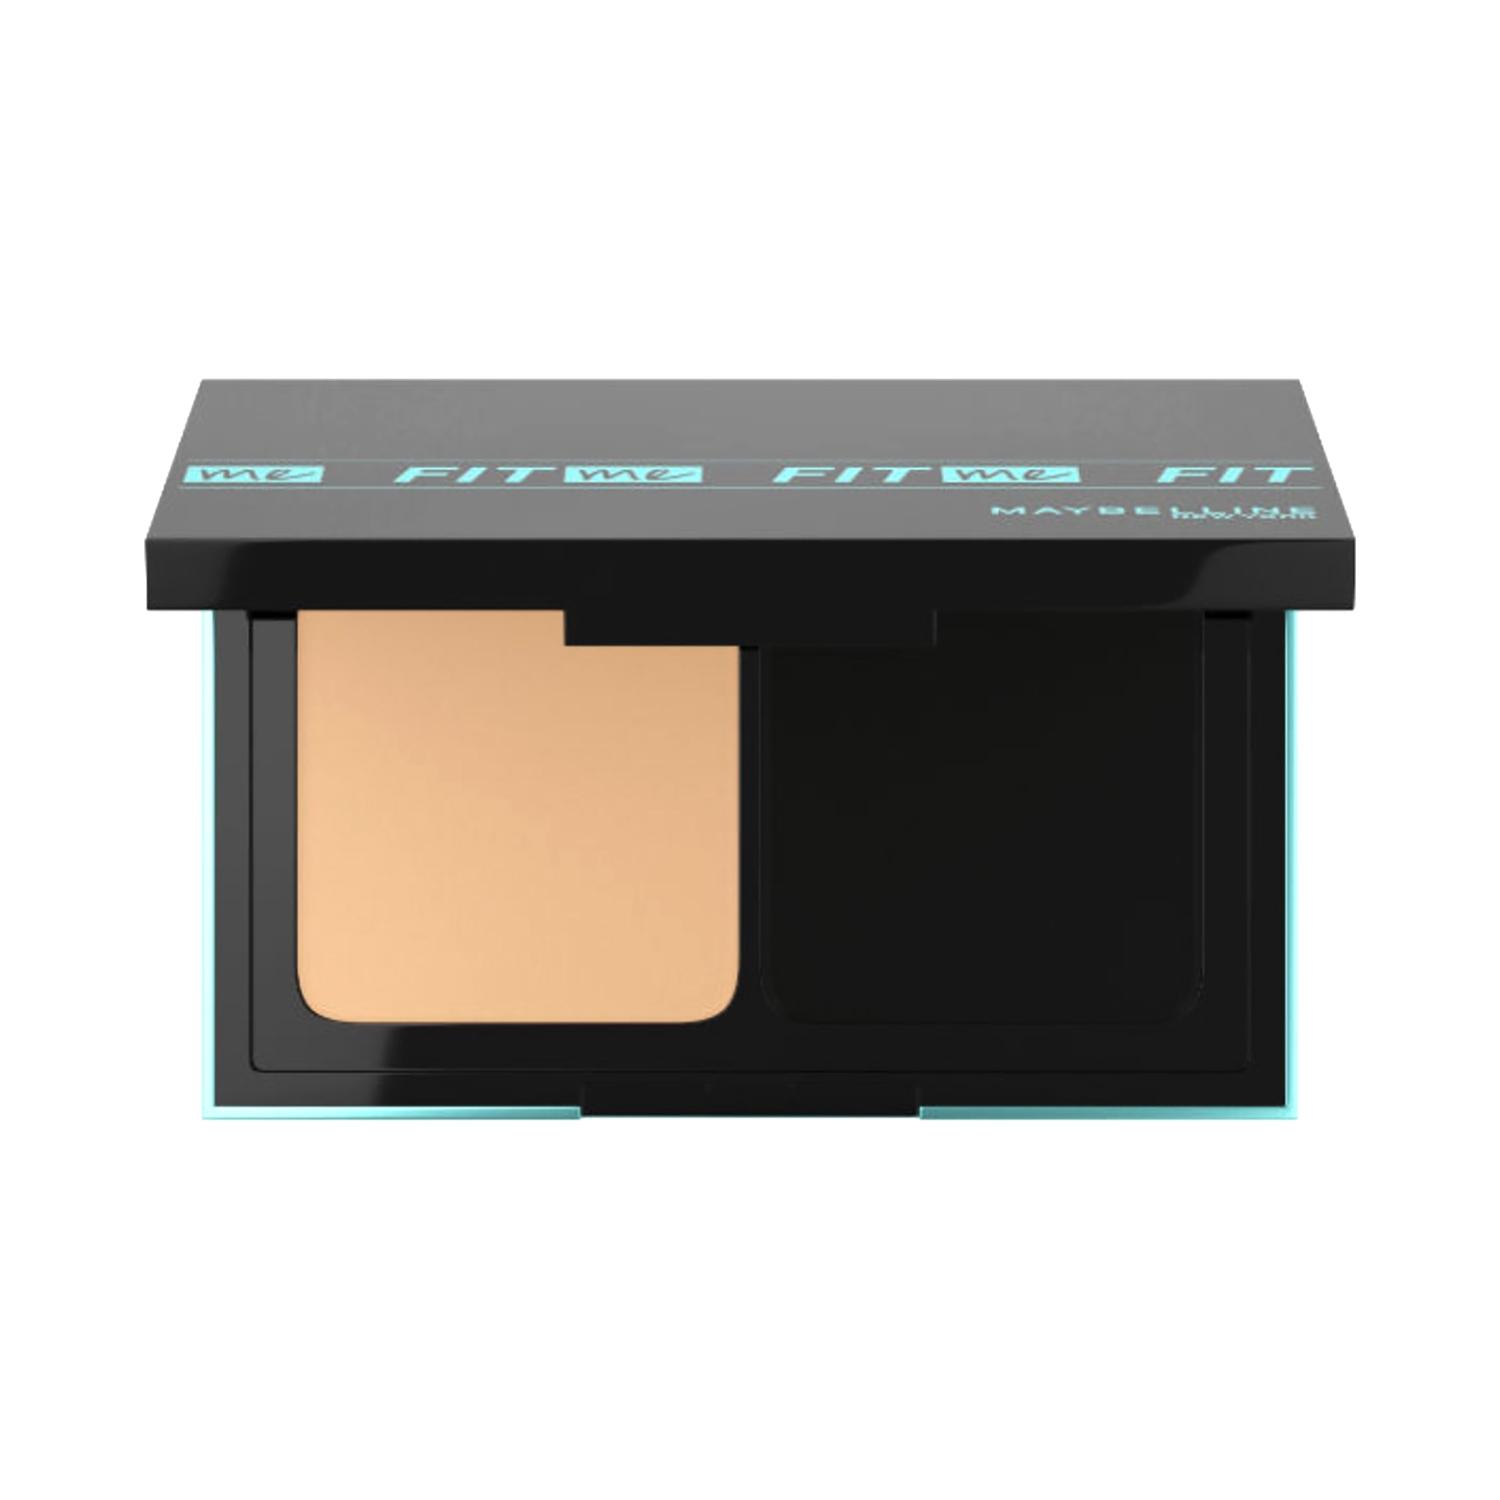 maybelline new york fit me ultimate powder foundation - shade 128 (9g)